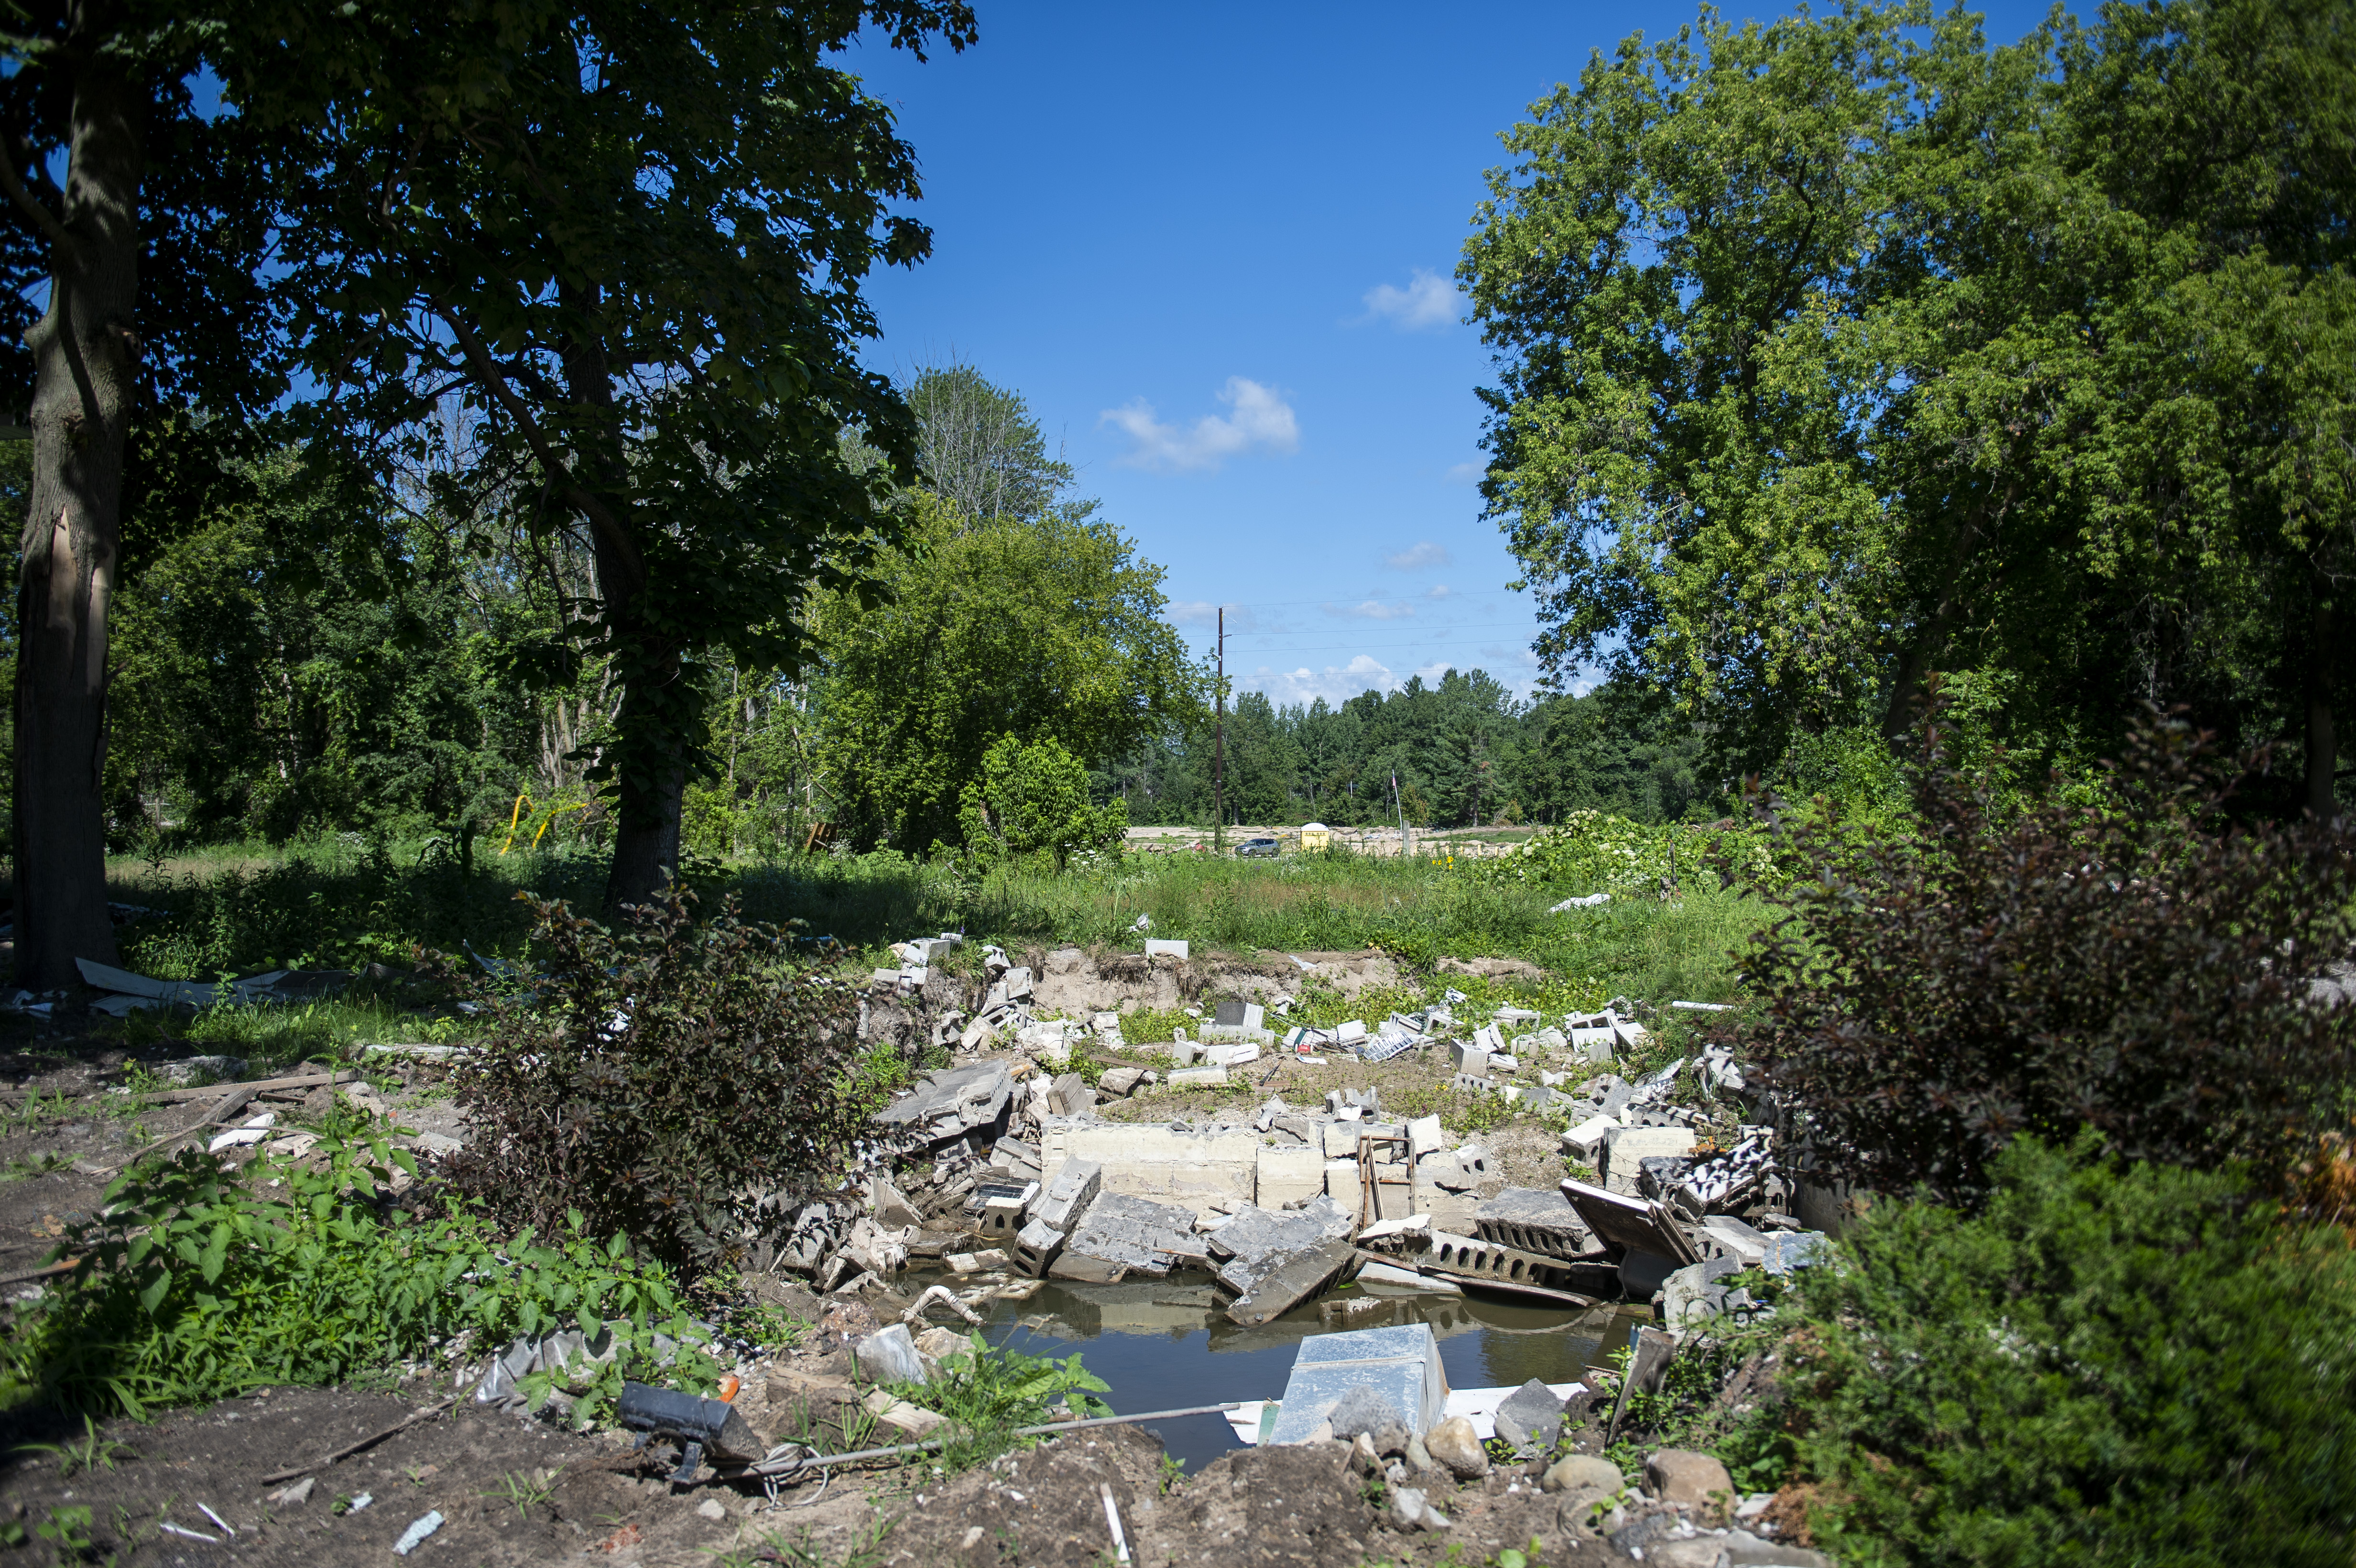 A view of what's left of a foundation of a home near the Sanford Dam in Sanford on Thursday, July 30, 2020. The devastating flood in May gushed over the majority of land in this area. (Kaytie Boomer | MLive.com)